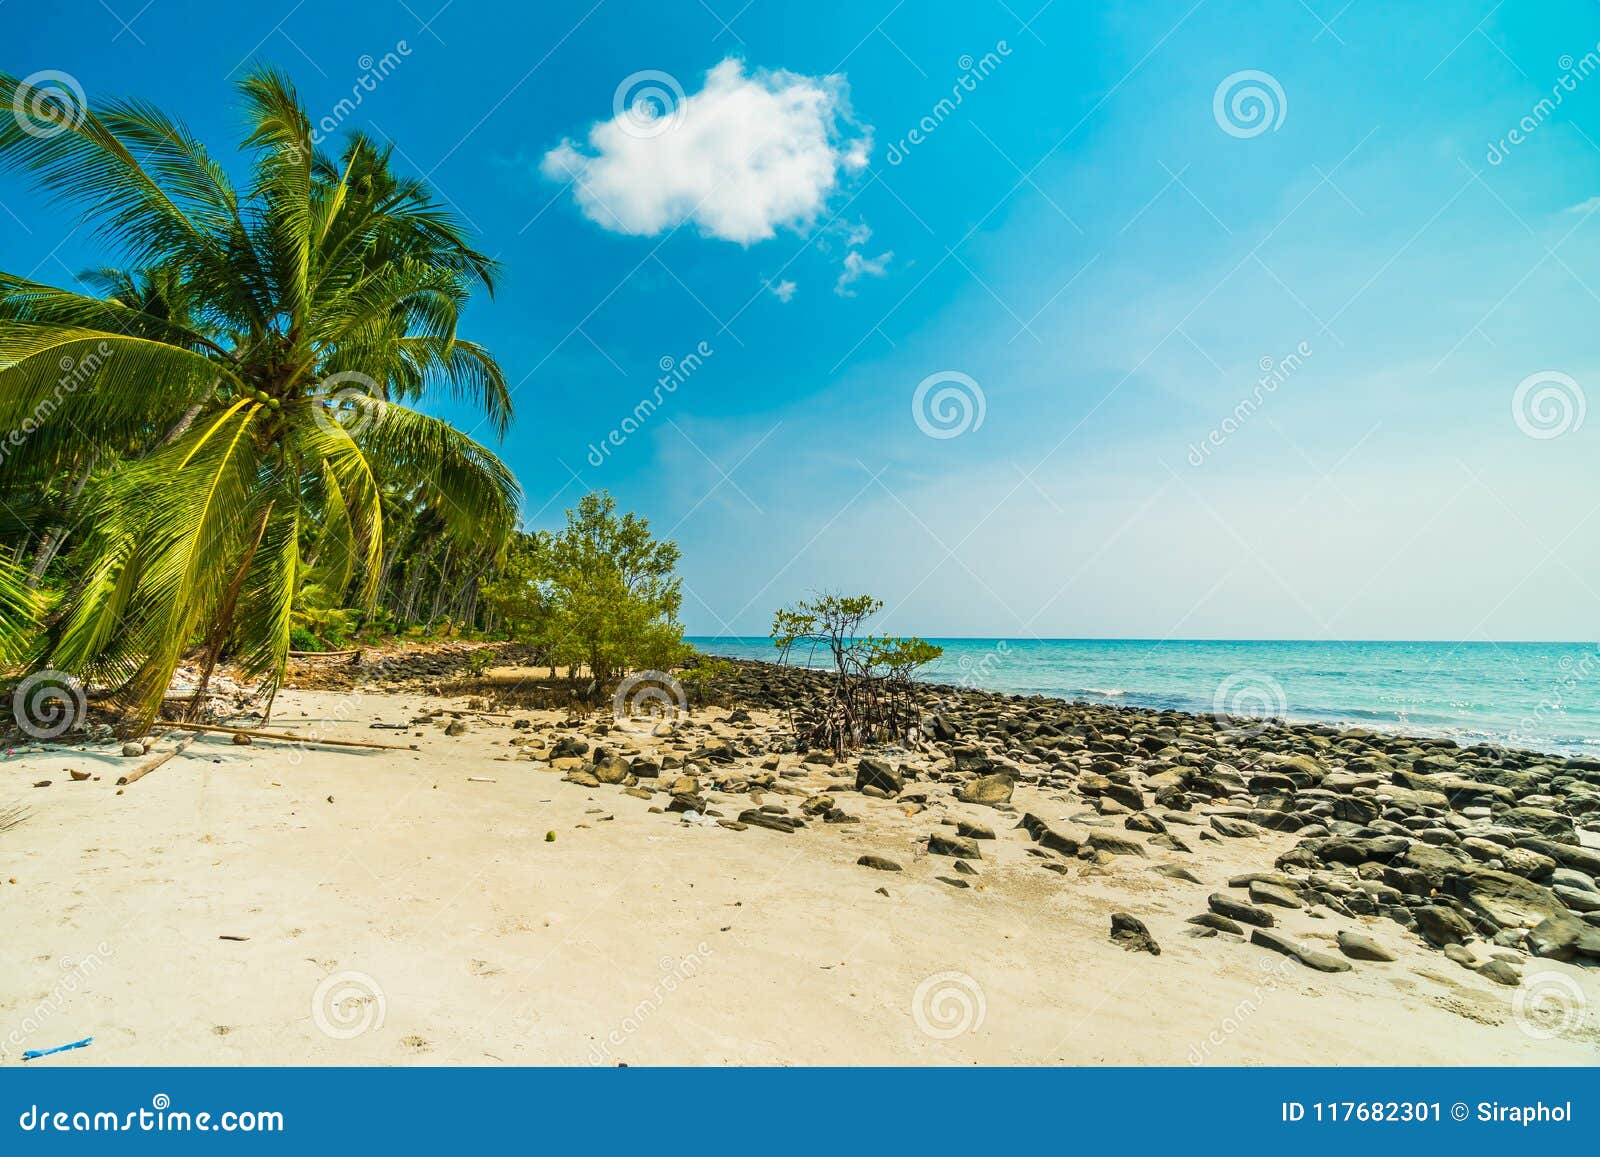 Beautiful Nature Tropical Beach And Sea With Coconut Palm Tree O Stock Image Image Of Beach